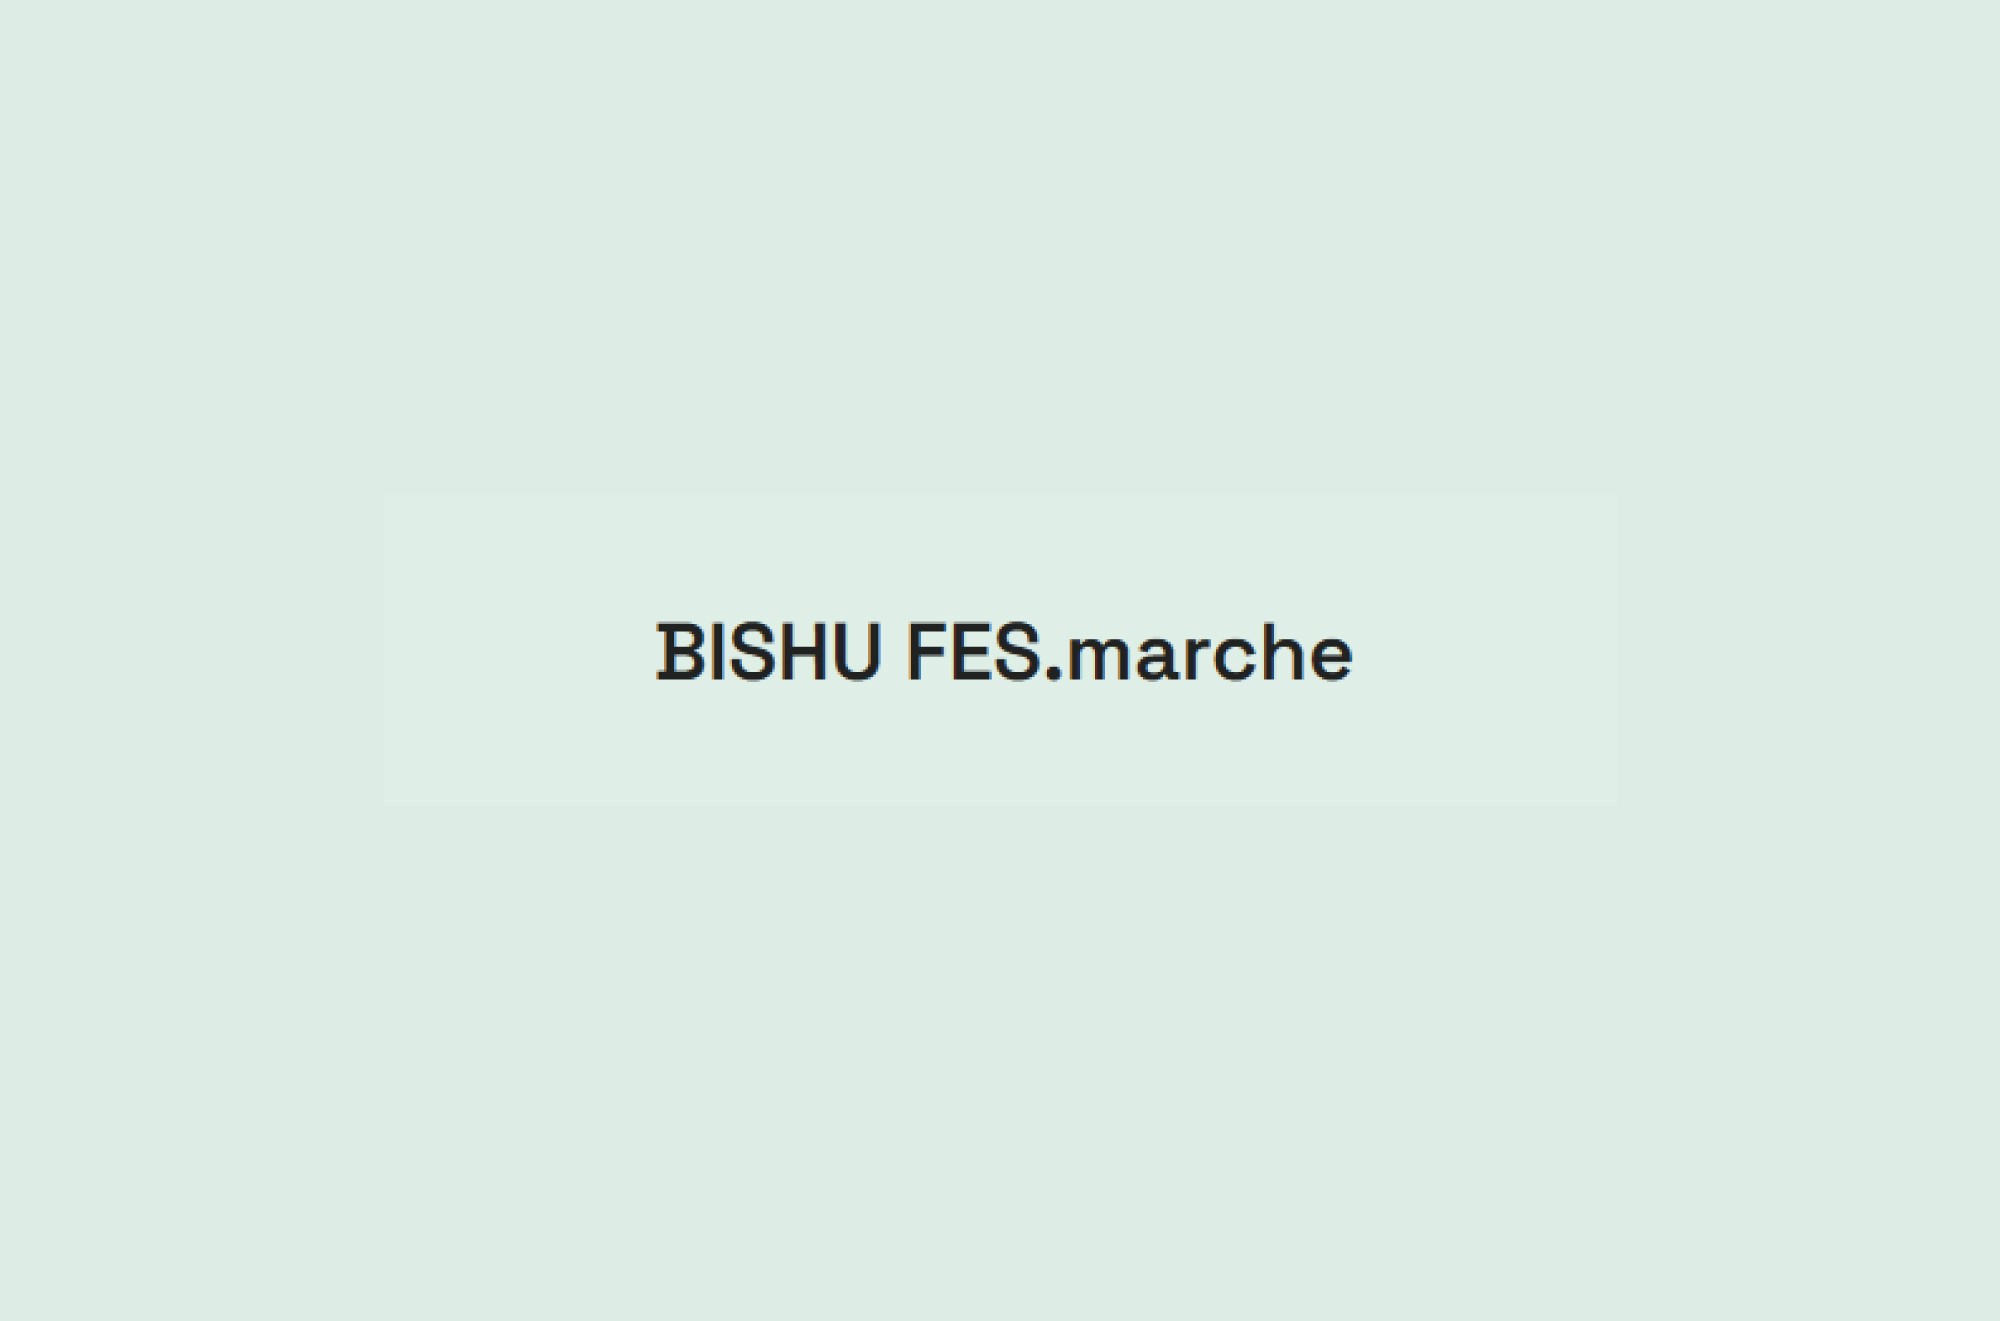 BISHU FES.marche ブース出展・ステージ出演の追加応募は8月7日(月)が期限！